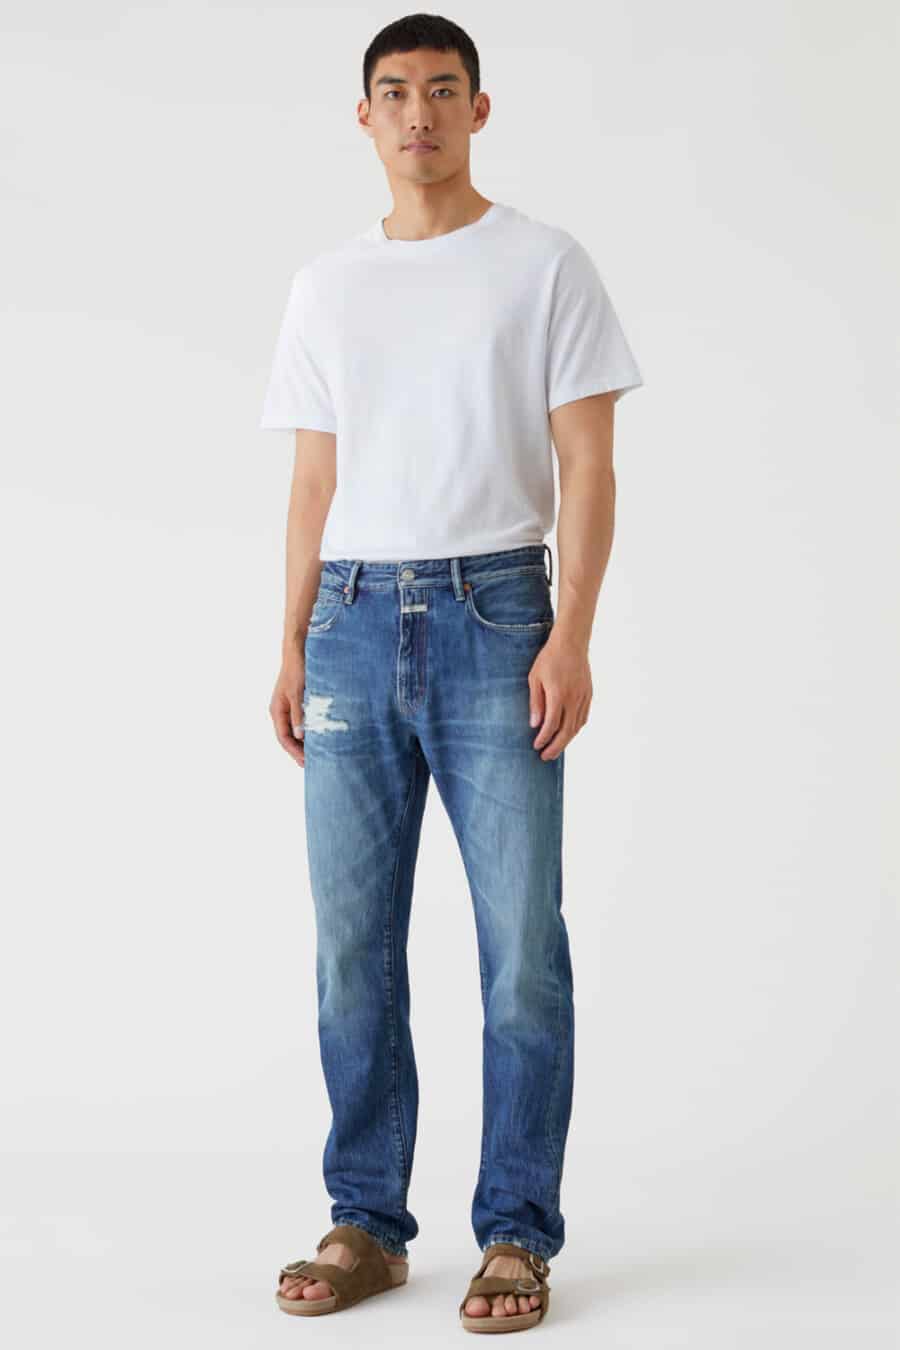 Men's subtly distressed blue jeans, white tucked in T-shirt and sandals outfit